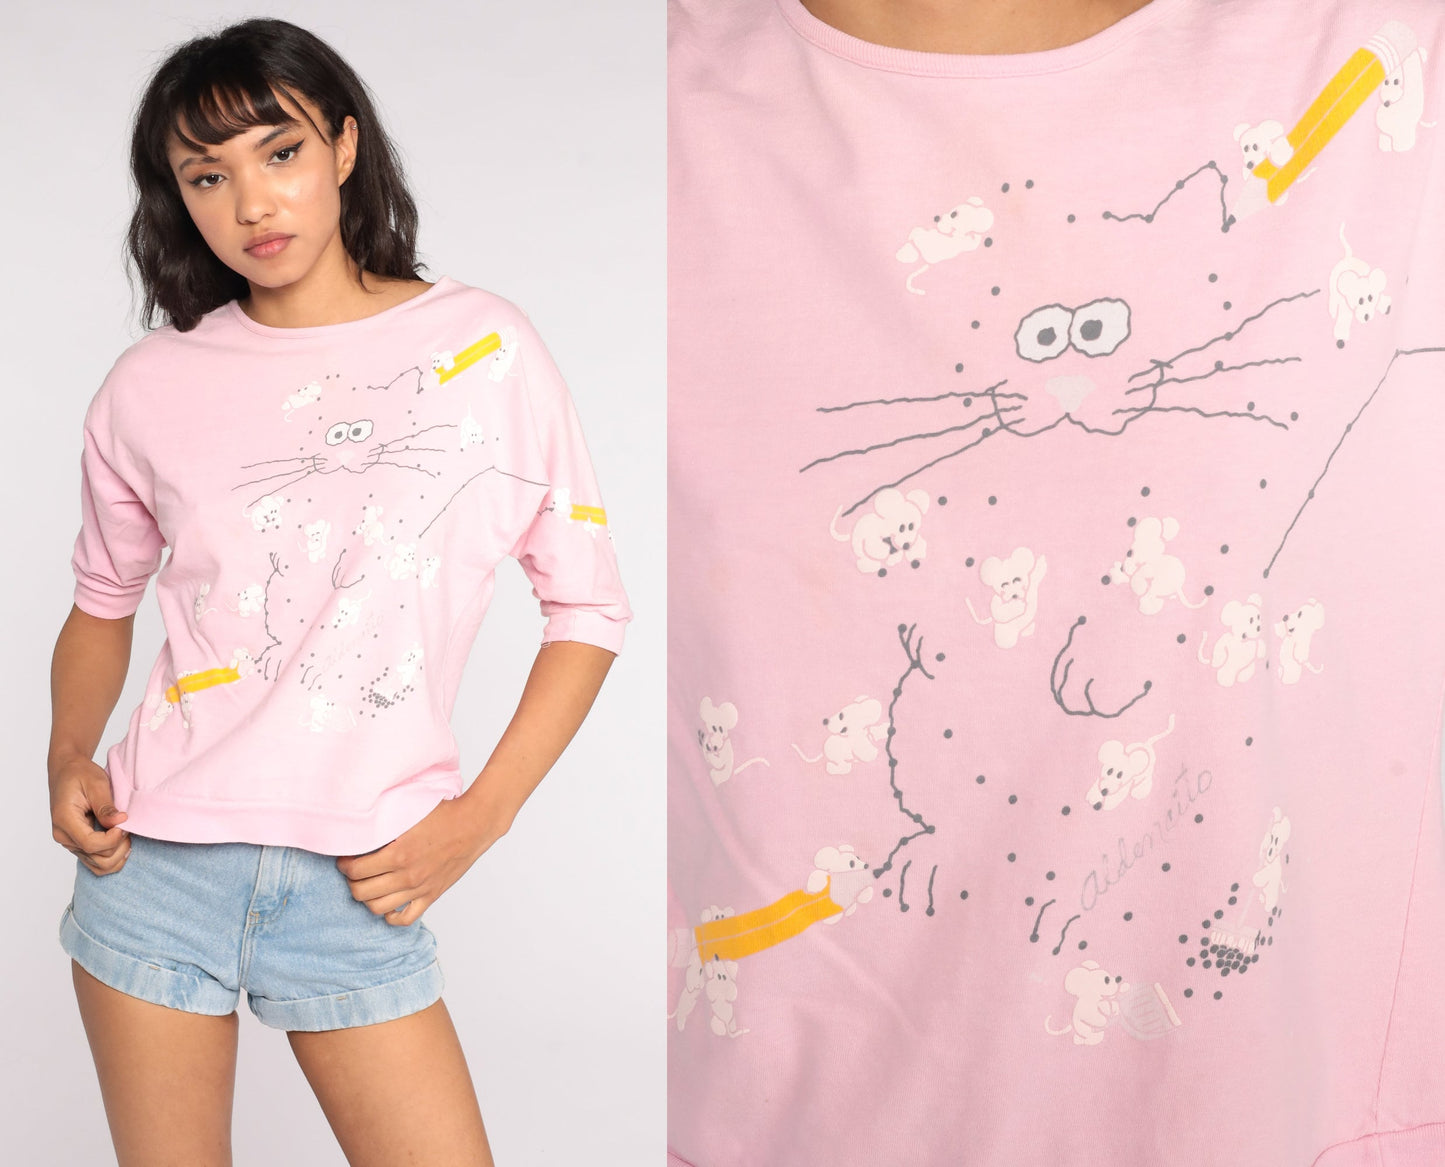 Cat Mouse Shirt CONNECT THE DOTS Tshirt Kawaii Animal Top 80s Graphic Baby Pink Tee Retro 1980s Vintage Tee T Shirt Small